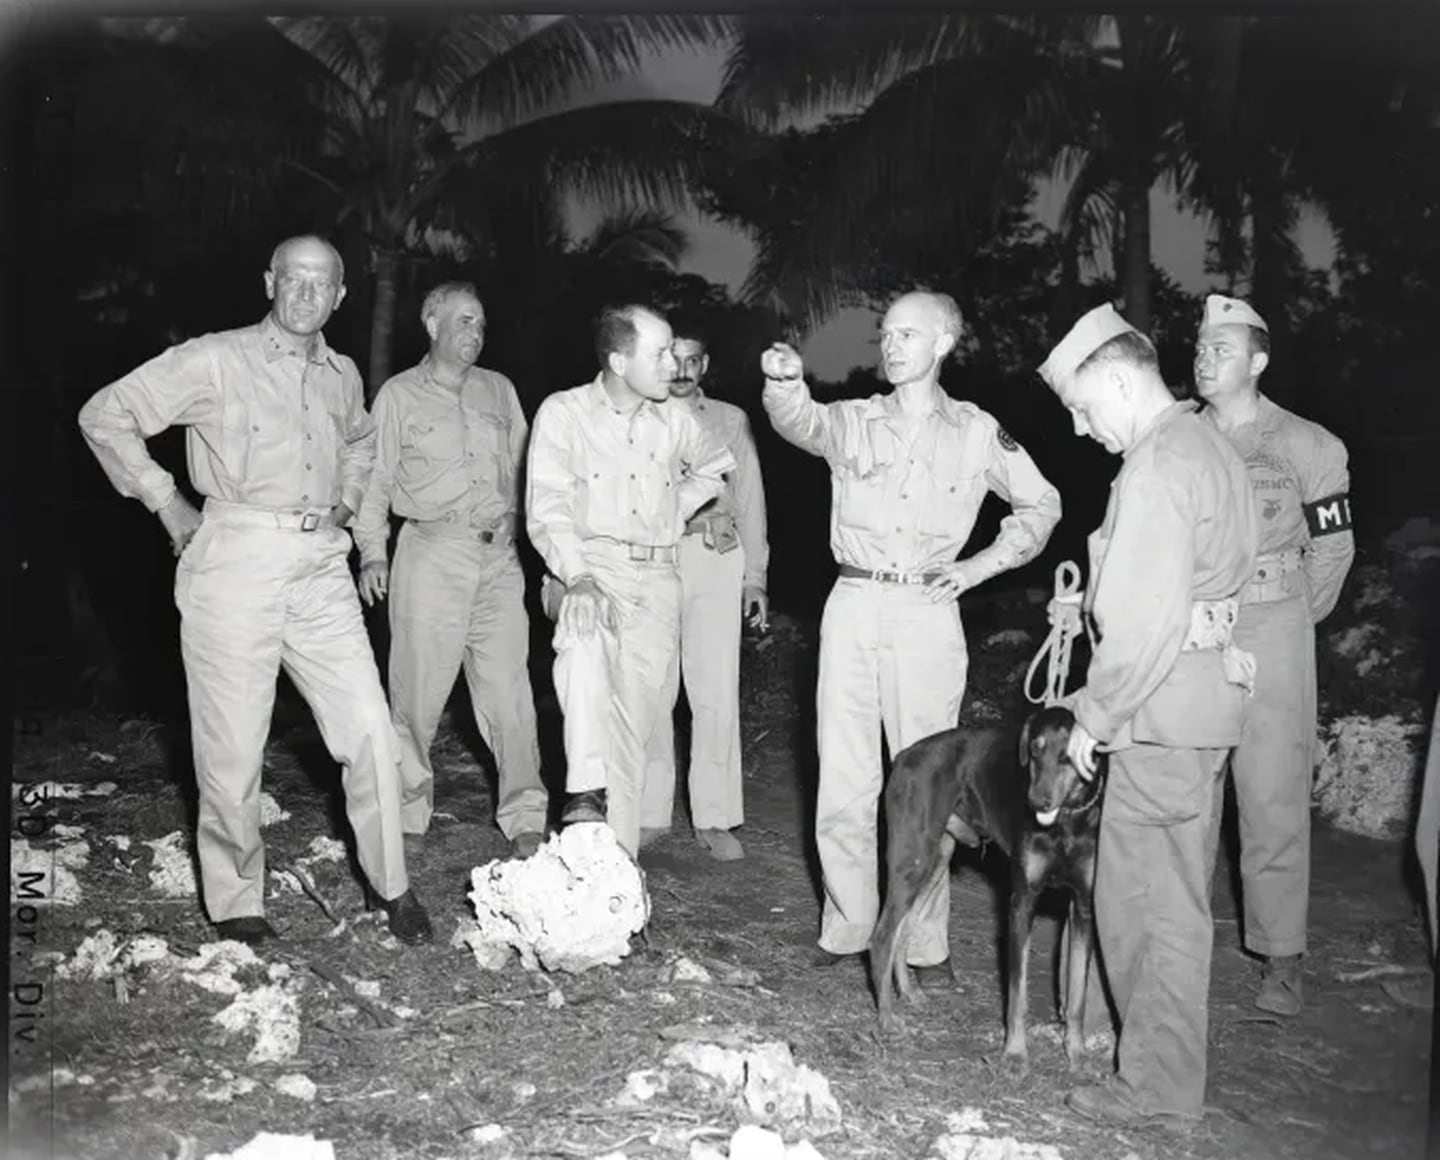 Ernie Pyle talks to Maj. Gen. Graves B. Erskine during Pyle’s first trip into the Pacific on Jan. 22, 1945. Previously, he wrote about “GI Joe” from the European Theater of Operations.